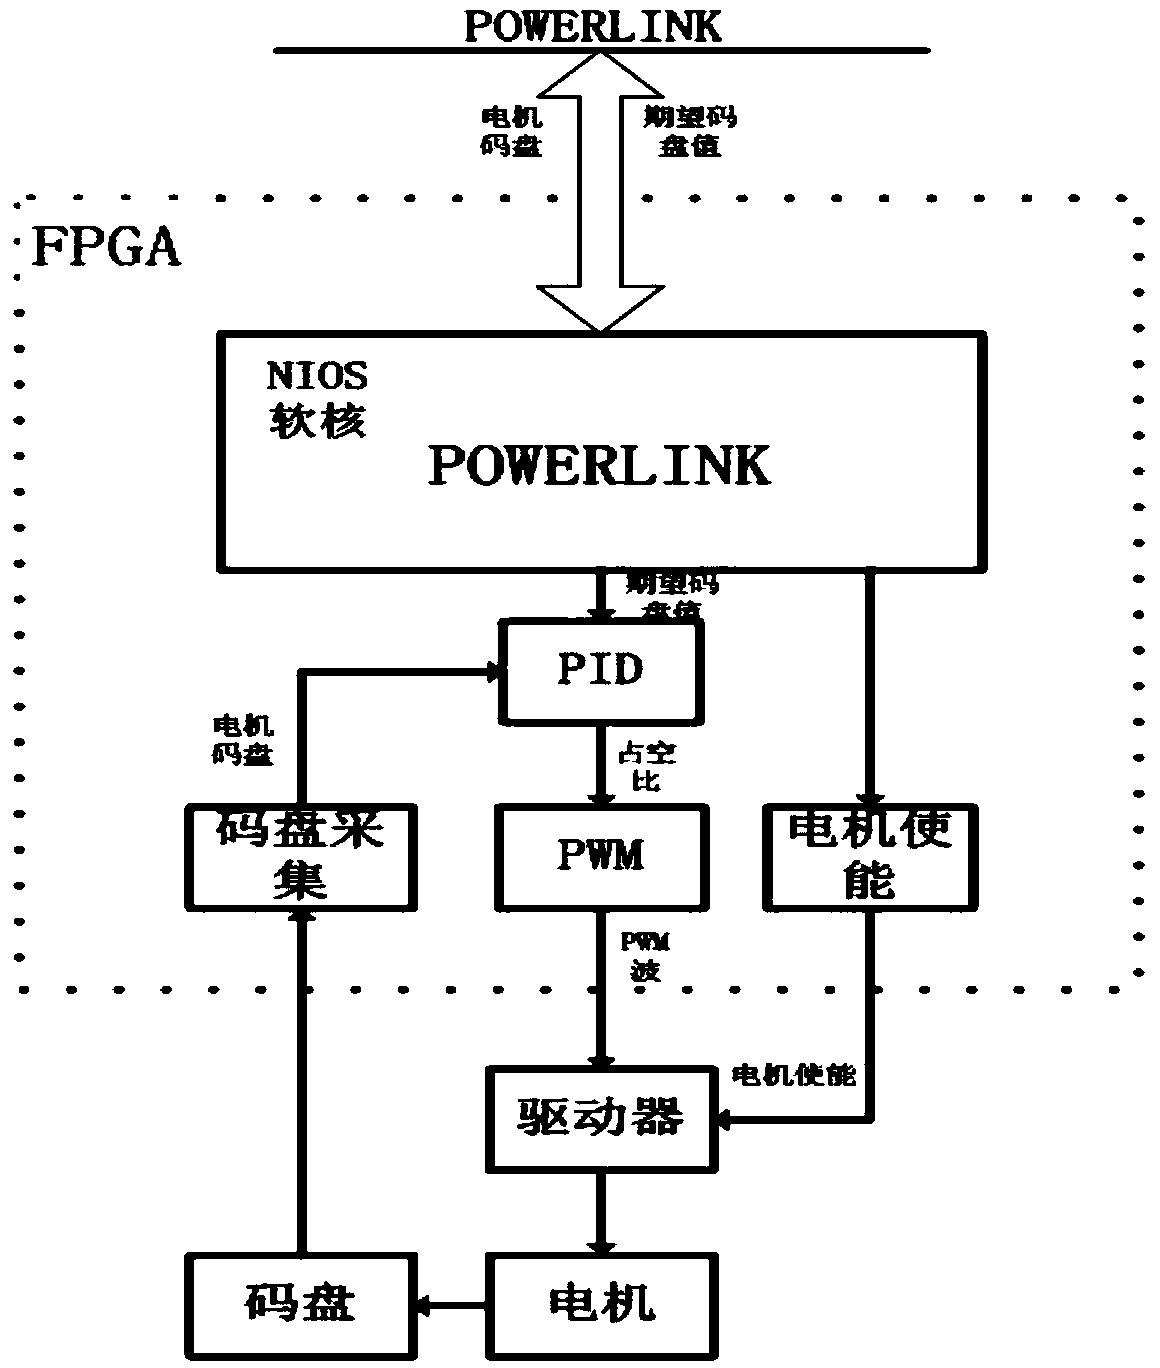 Method for implementing a variable parameter PID motion controller based on Ethernet Powerlink